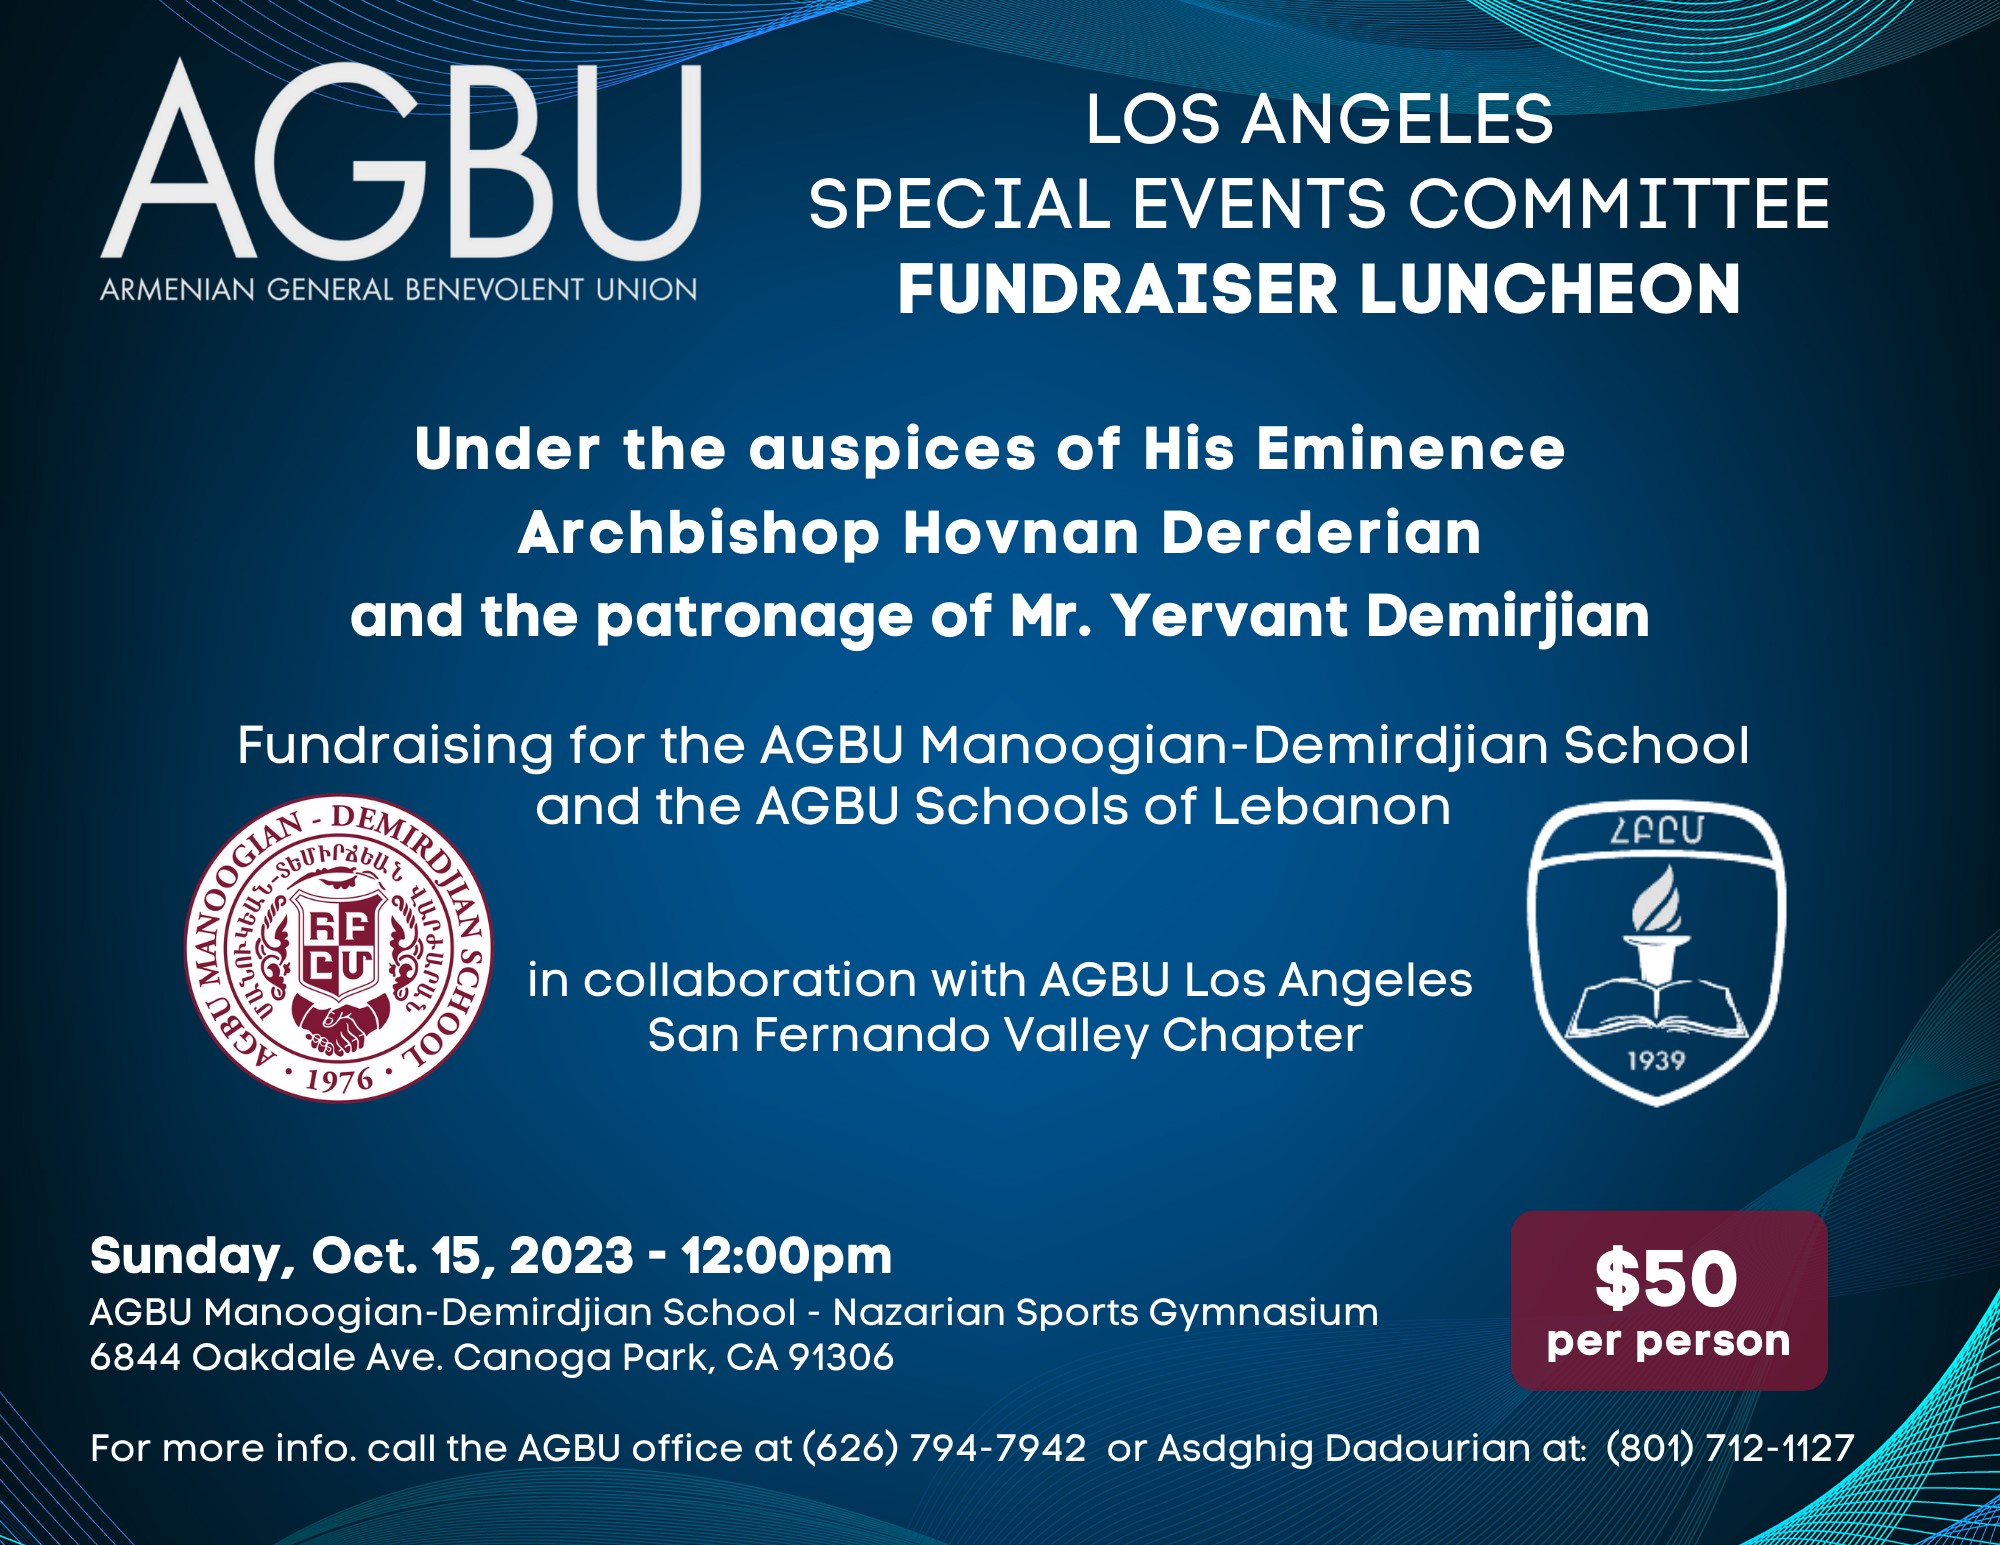 AGBU LA Special Events Committee Fundraiser Luncheon